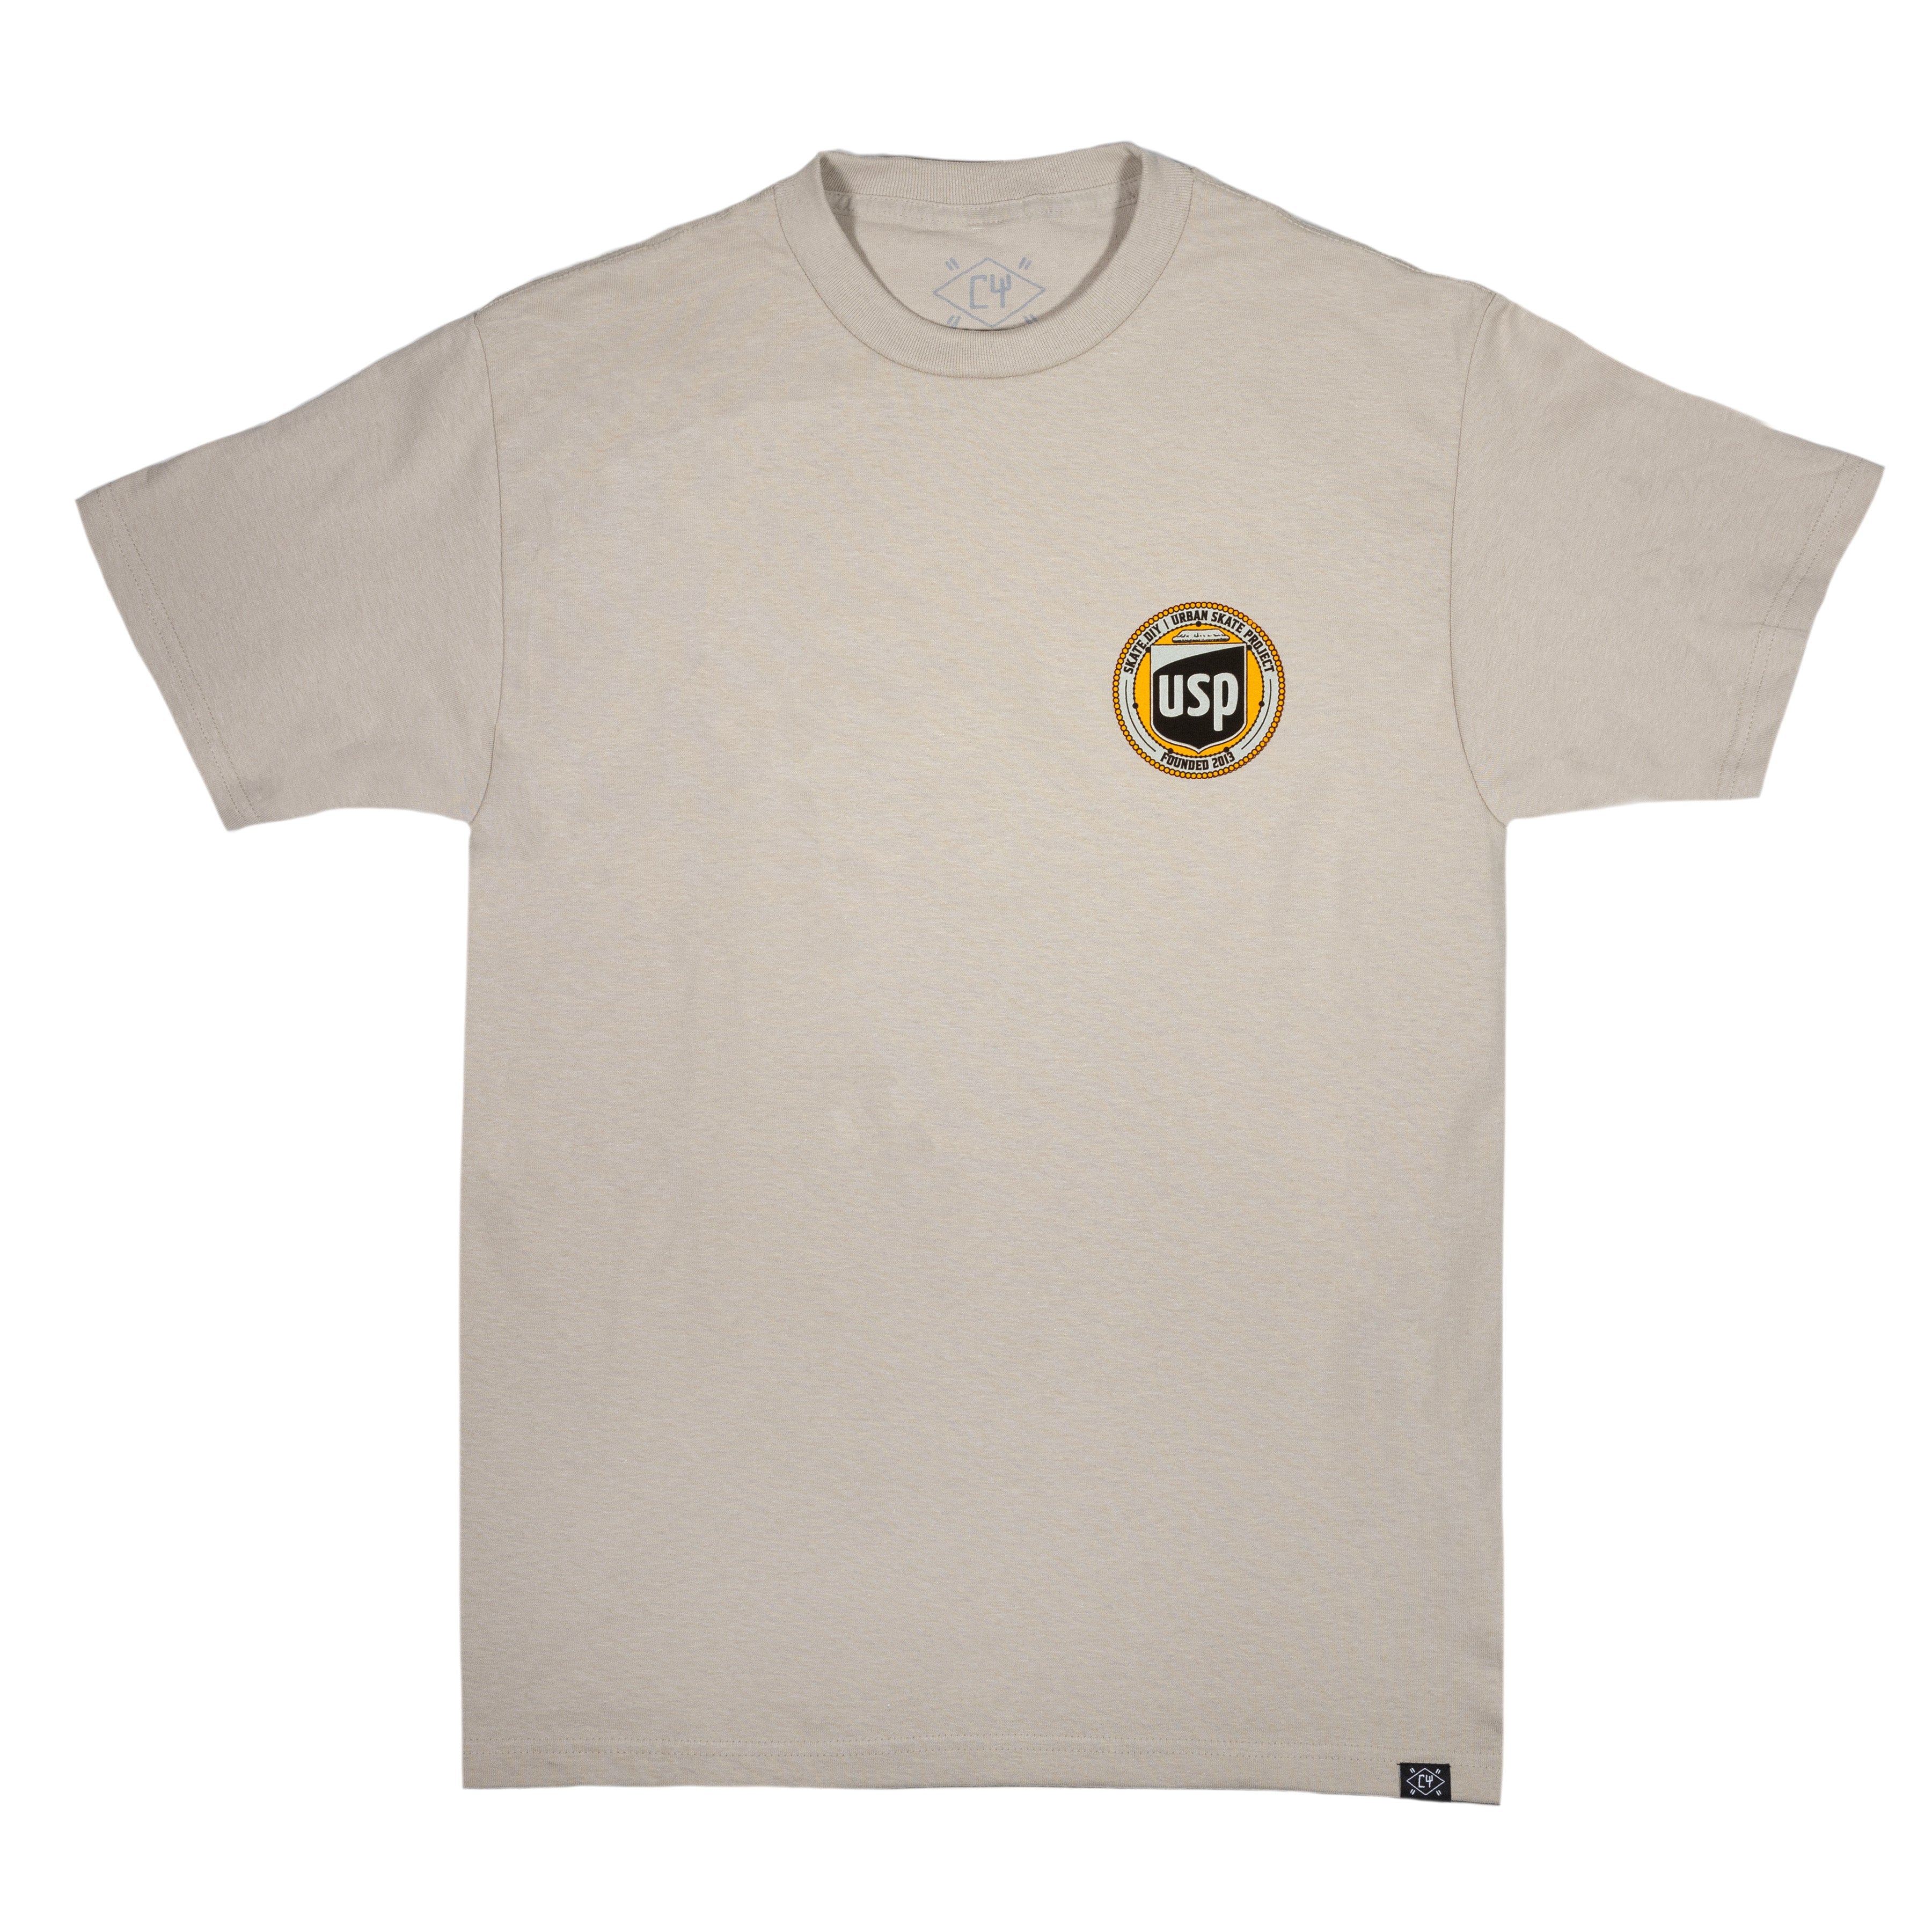 USP "10 YEAR" SEAL SS - commonyouthbrand